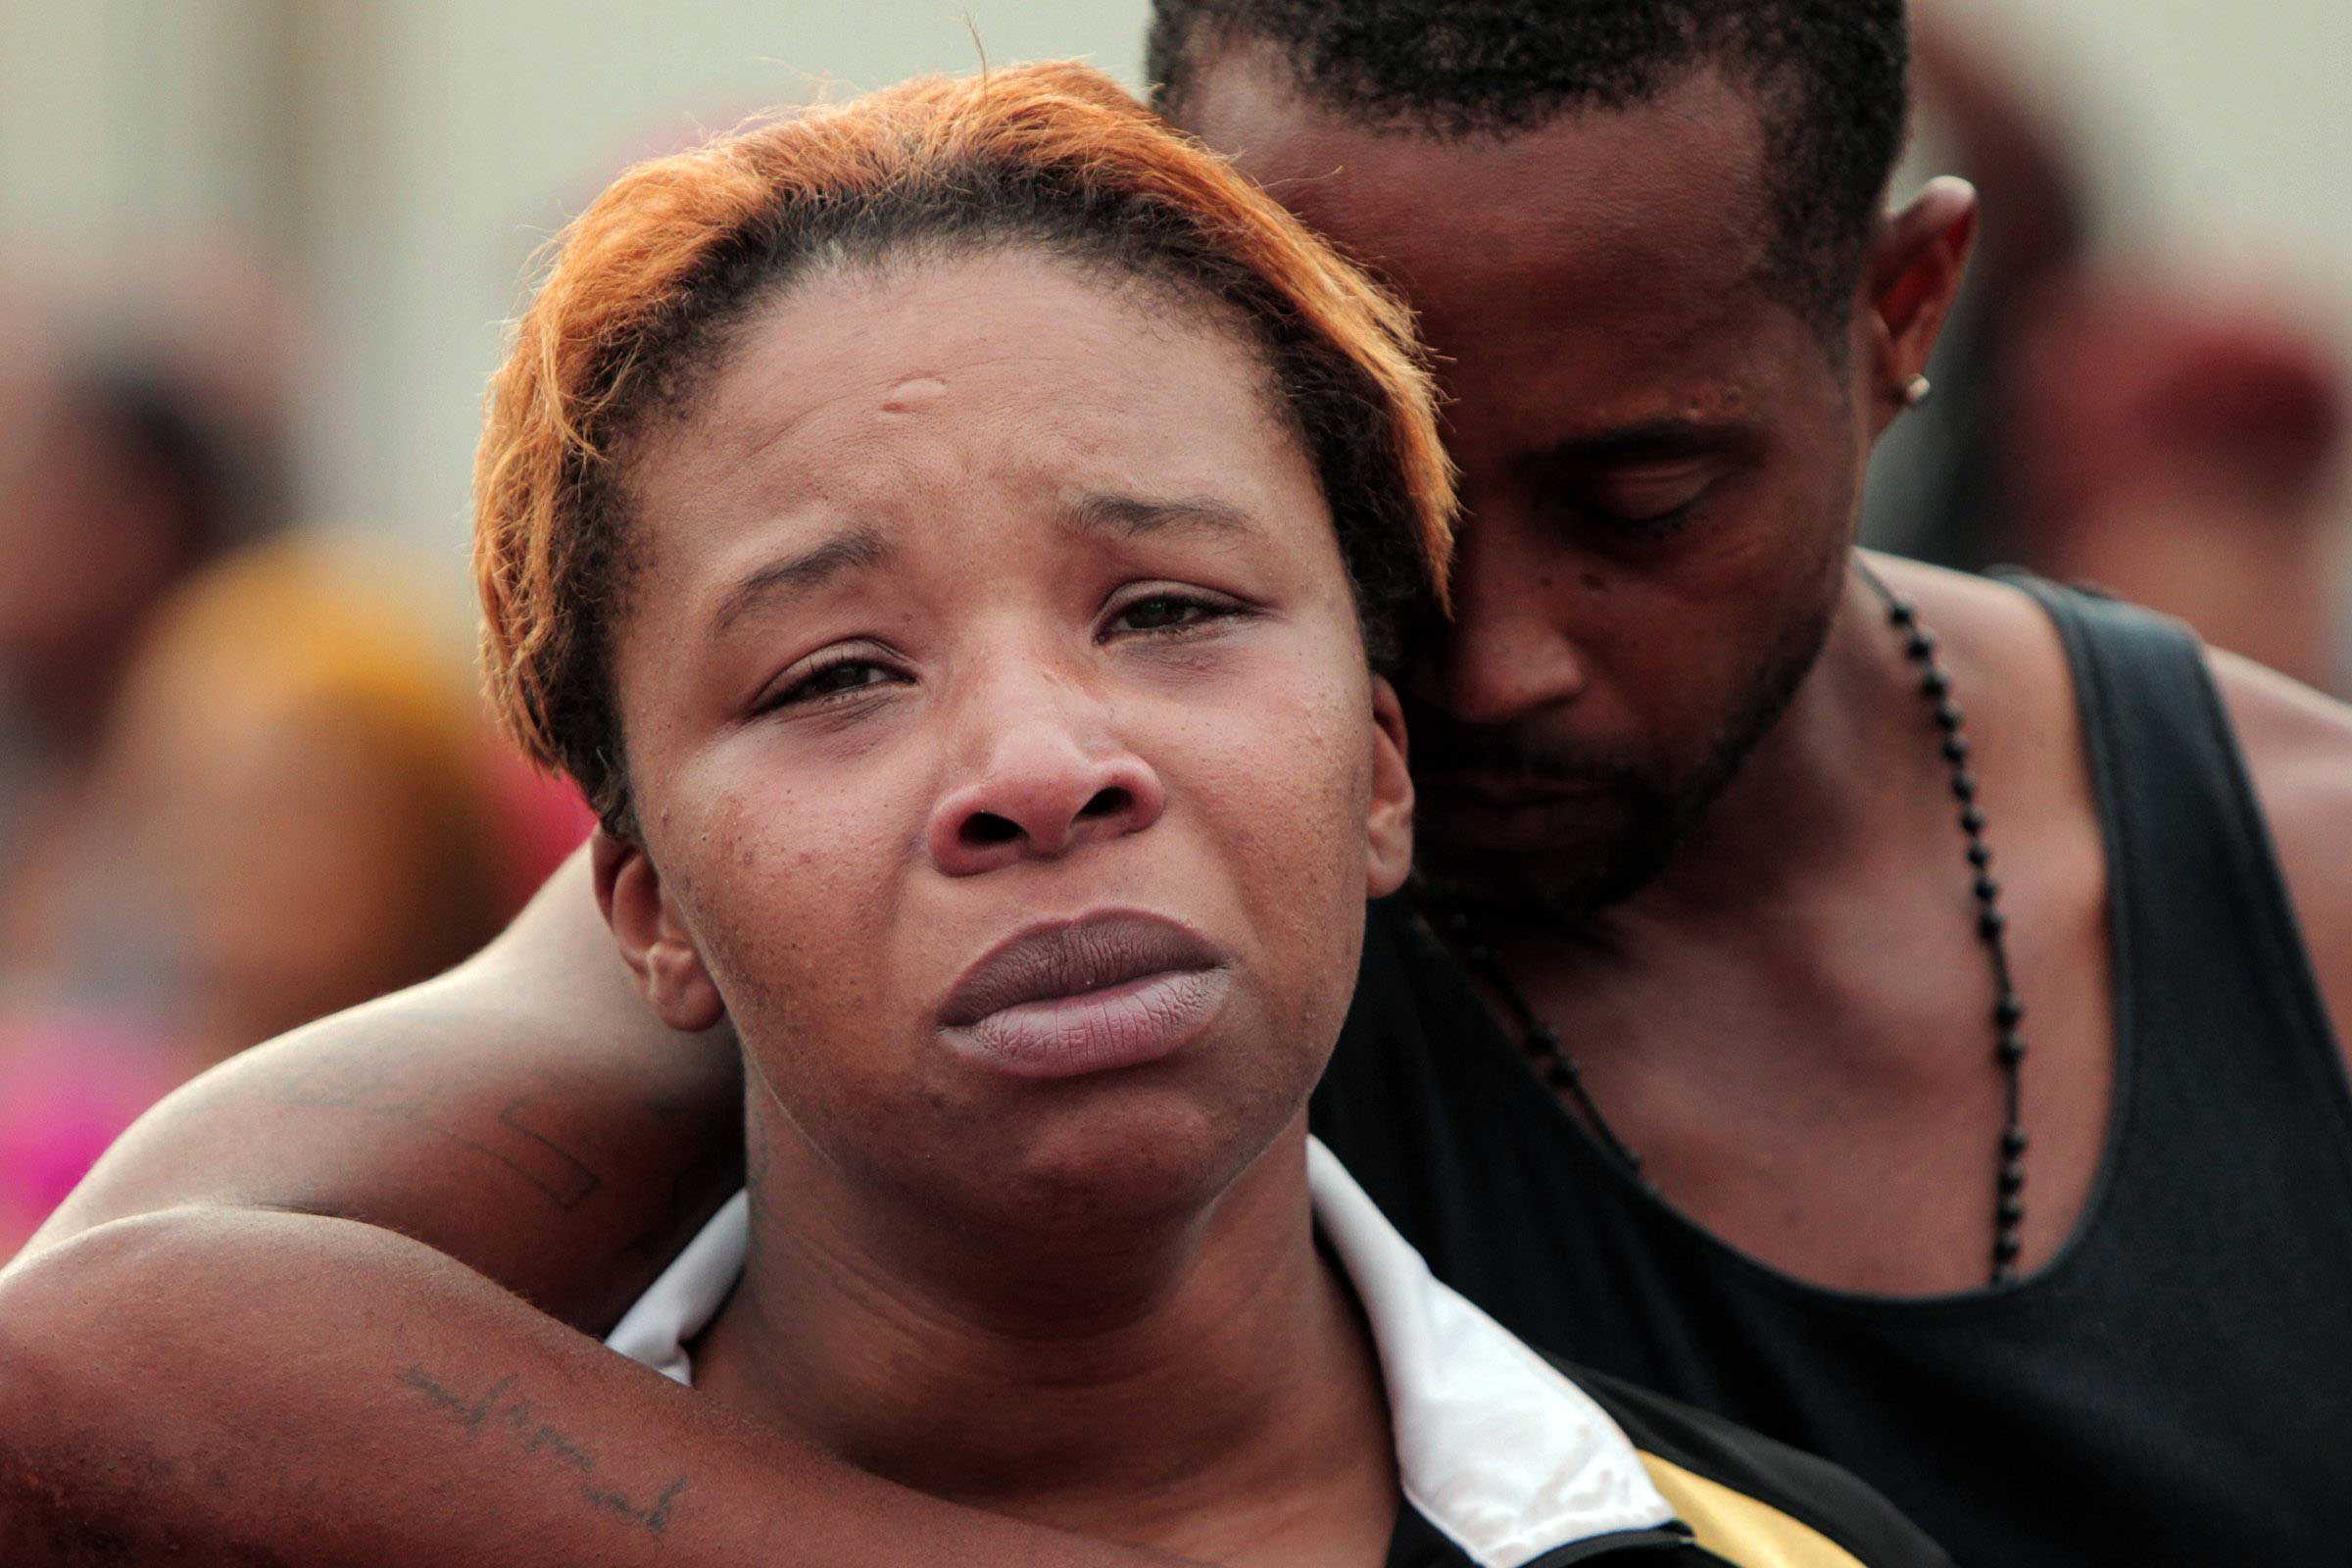 Aug. 9, 2014. Lesley McSpadden, left, is comforted by her husband, Louis Head, after her 18-year-old son, Michael Brown was shot and killed by police in the middle of the street in Ferguson, Mo., near St. Louis on Saturday. A spokesman with the St. Louis County Police Department, which is investigating the shooting at the request of the local department, confirmed a Ferguson police officer shot the man. The spokesman didn't give the reason for the shooting.